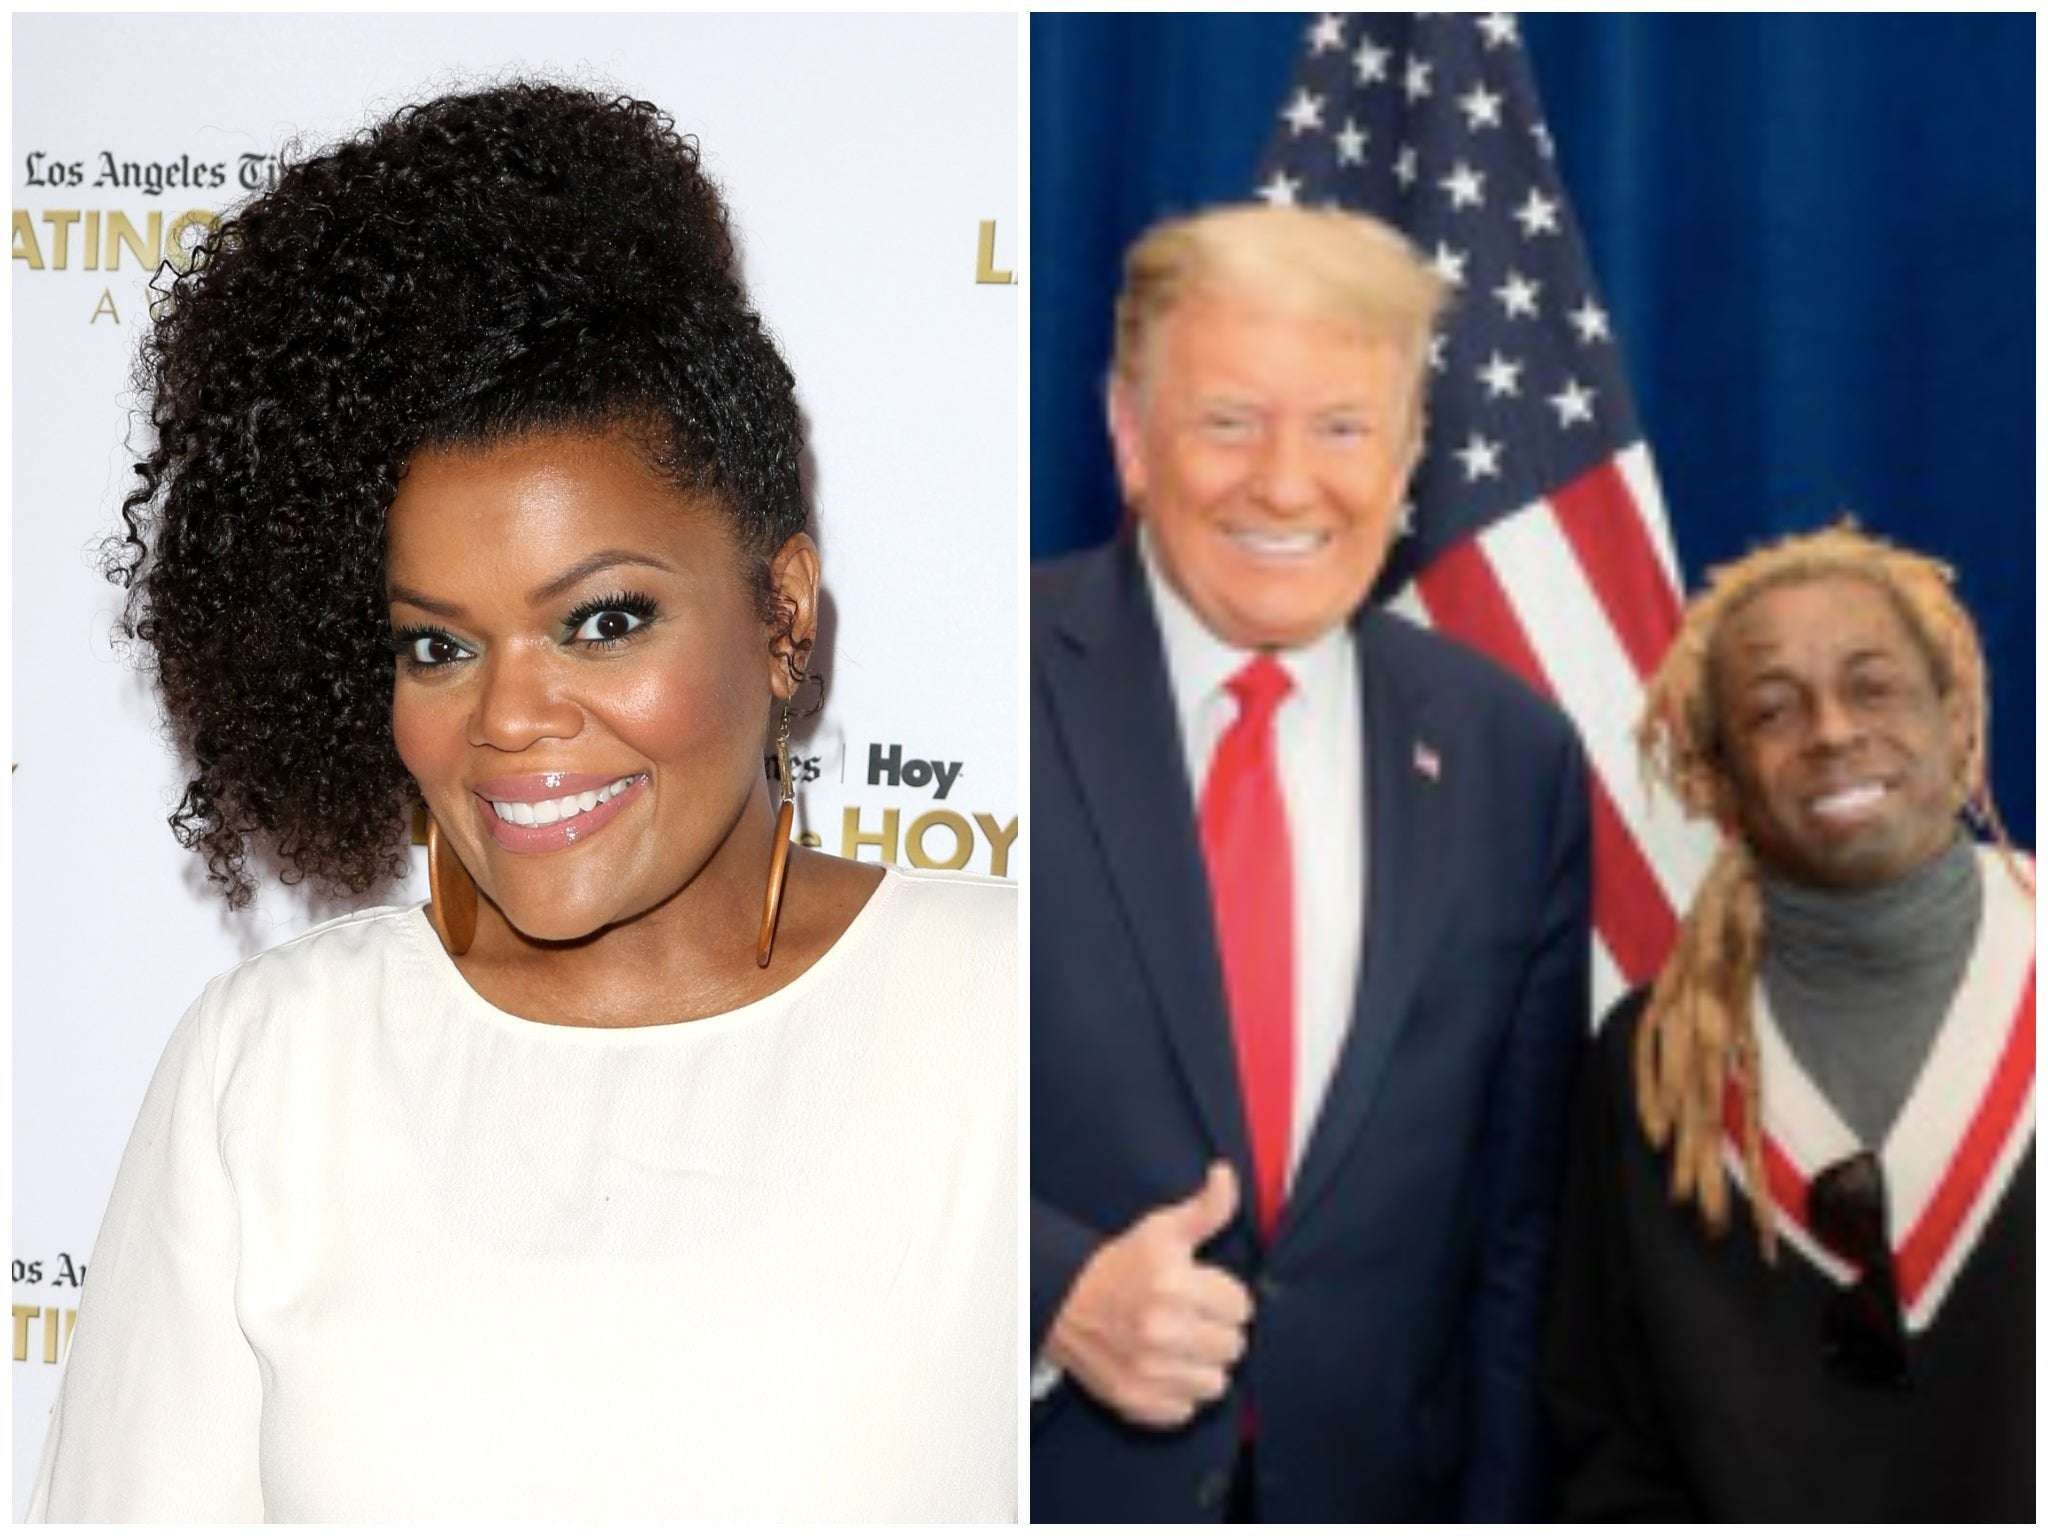 image for Lil Wayne and President Trump: Community star Yvette Nicole Brown calls out rapper for posting photo smiling alongside Trump